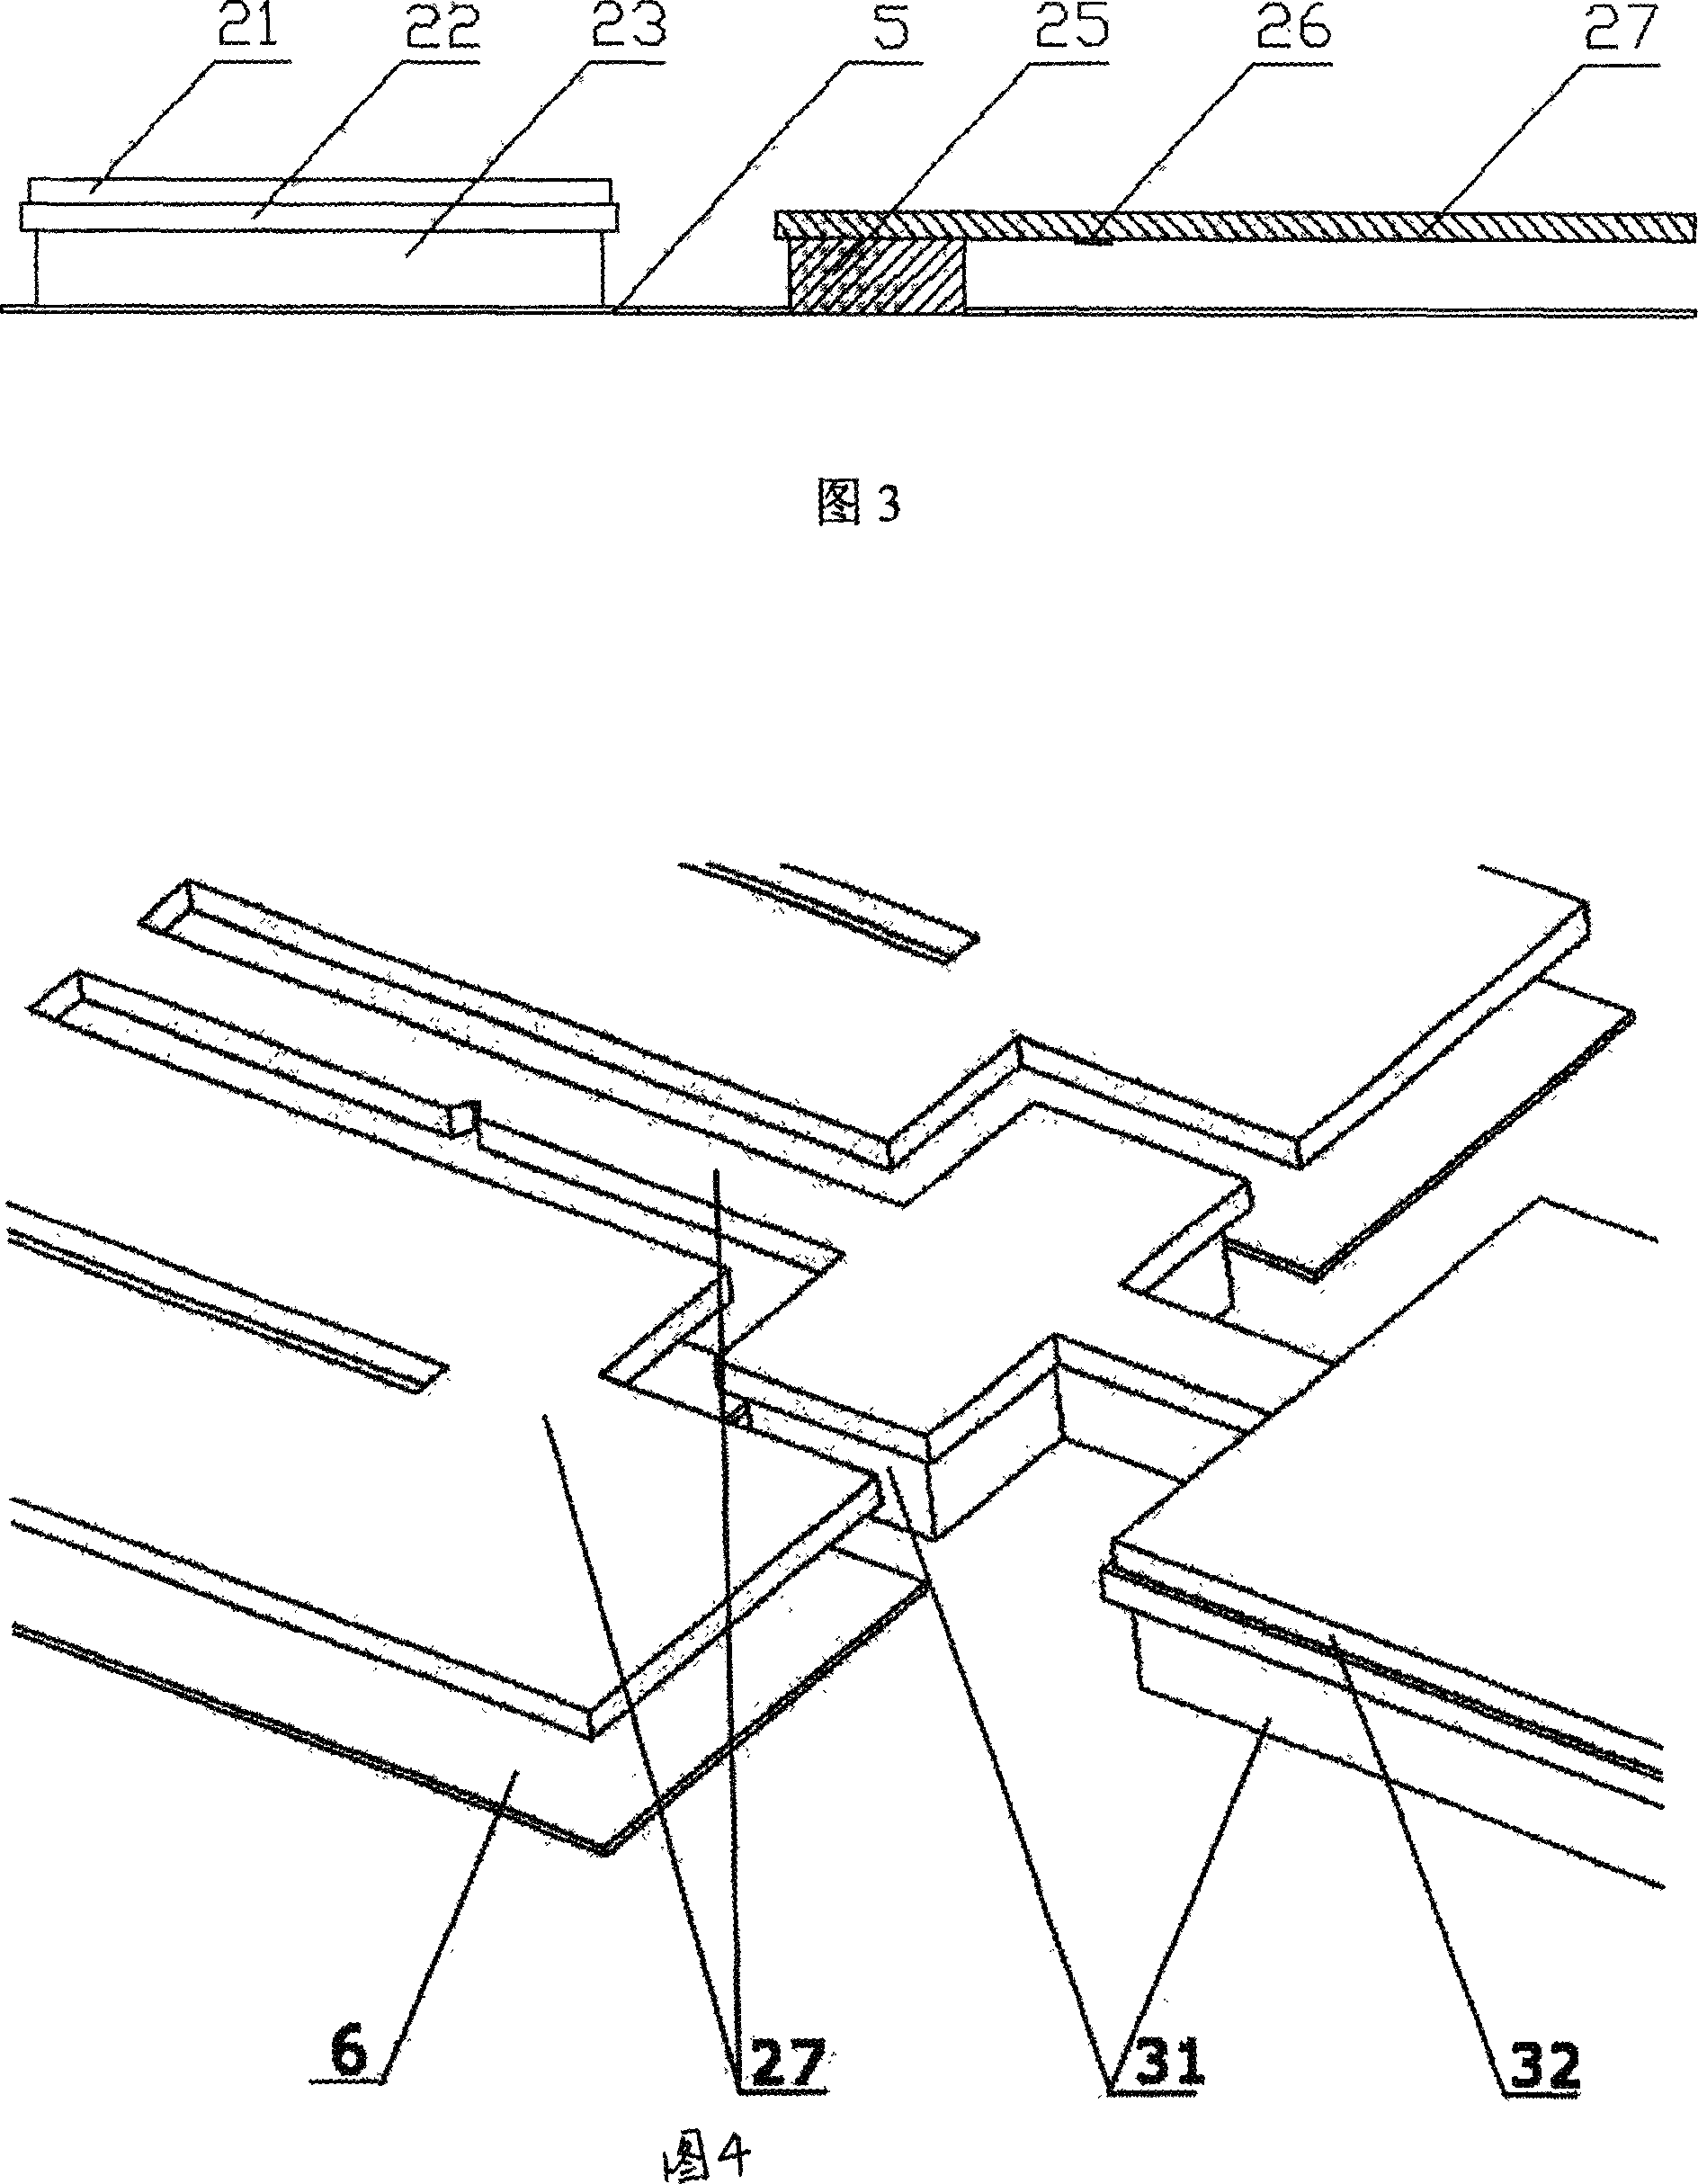 Endurance testing apparatus of micro-structure crankle driven by parallel plate capacitance